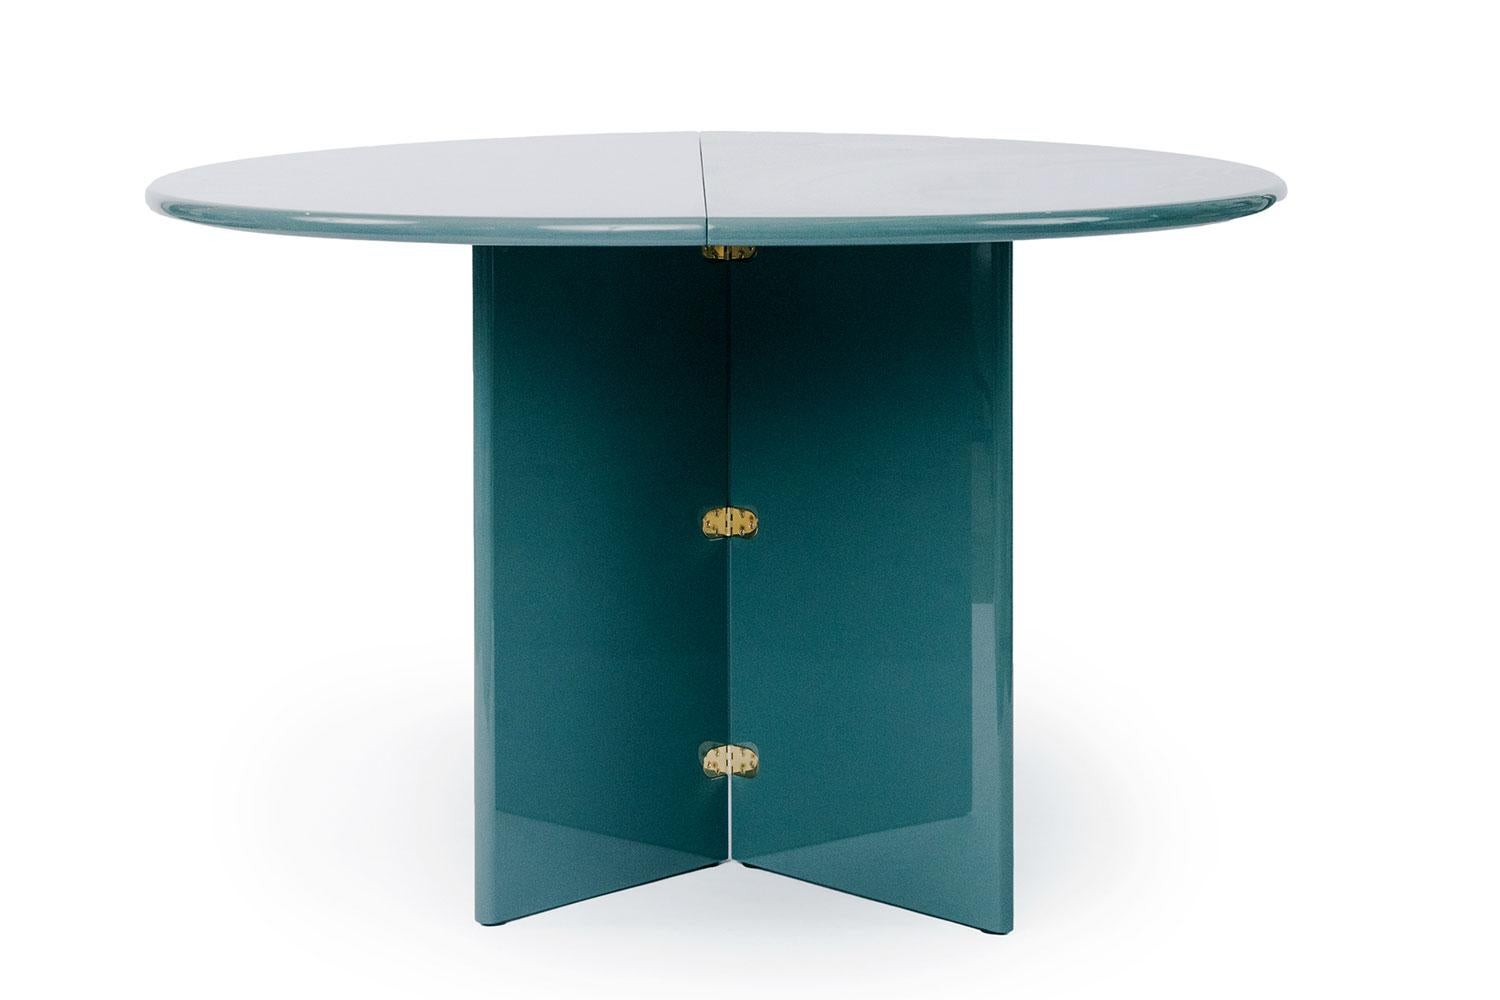 Antella Glossy Lacquered table by Cassina

Japanese architect Kazuhide Takahama designed Antella as a truly multi-functional piece of furniture. Kazuhide Takahama’s Antella is a dual-purpose piece: a console that can be transformed into an oval